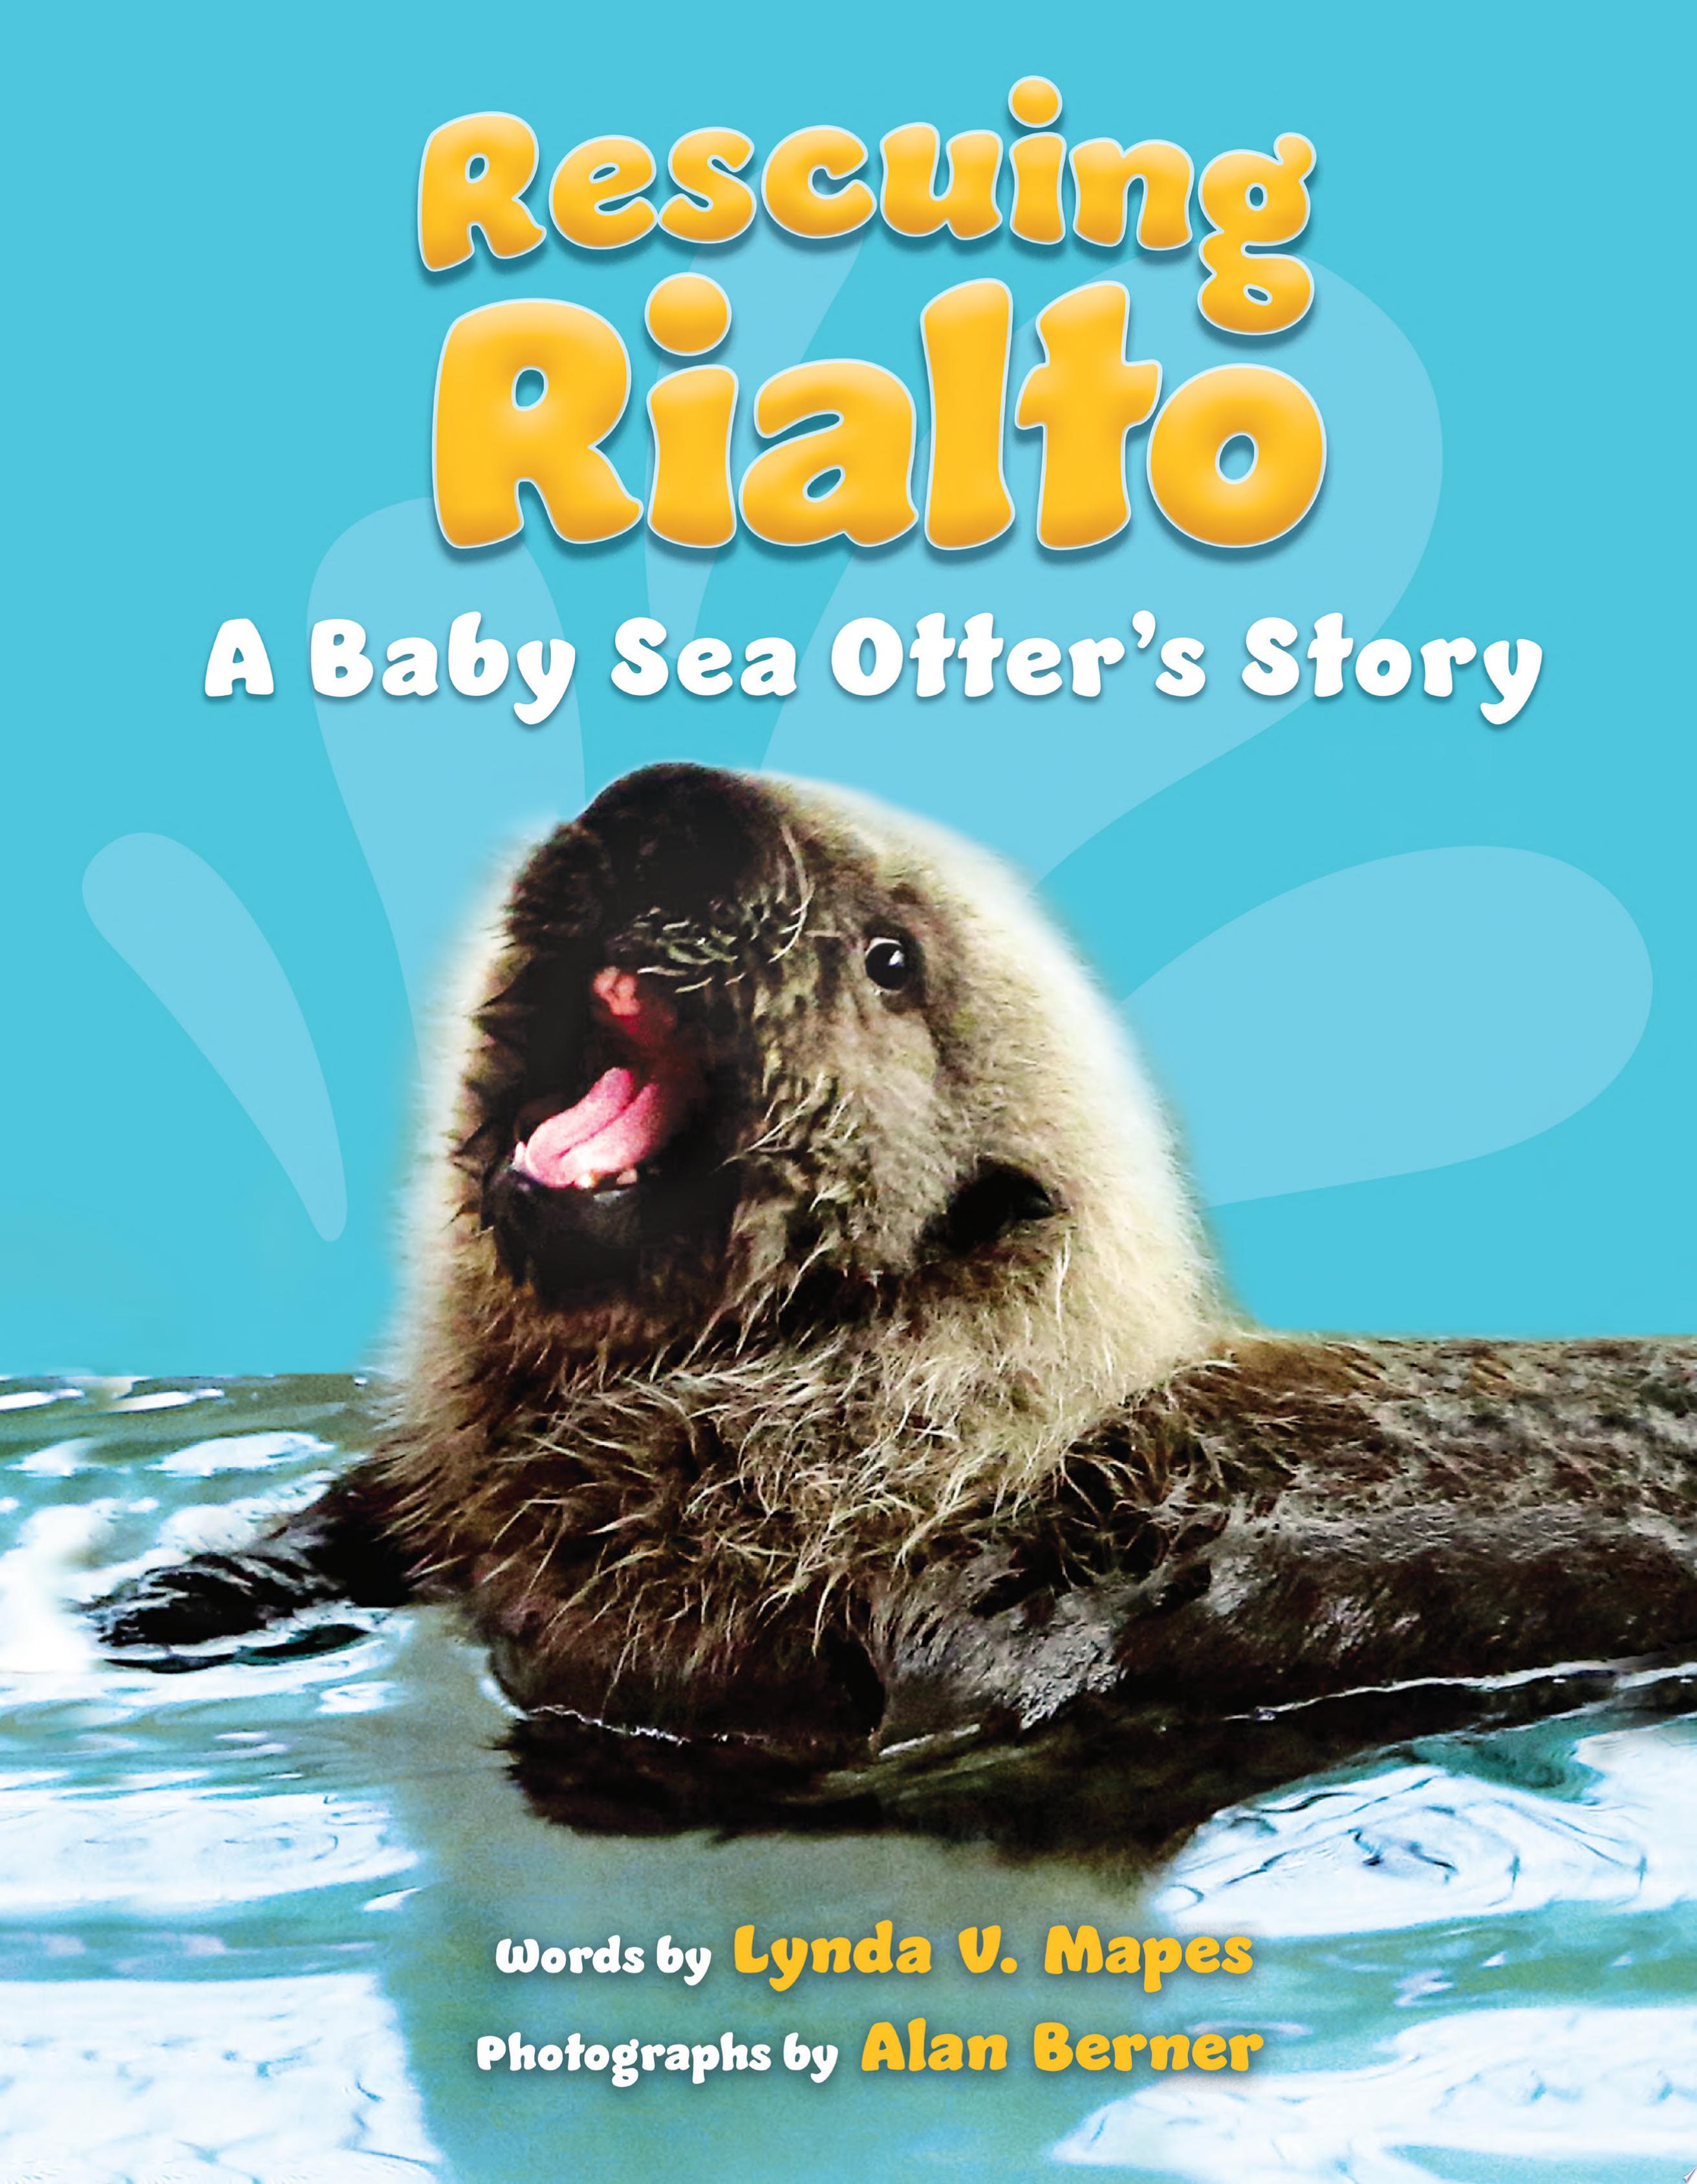 Image for "Rescuing Rialto: A Baby Sea Otter's Story"